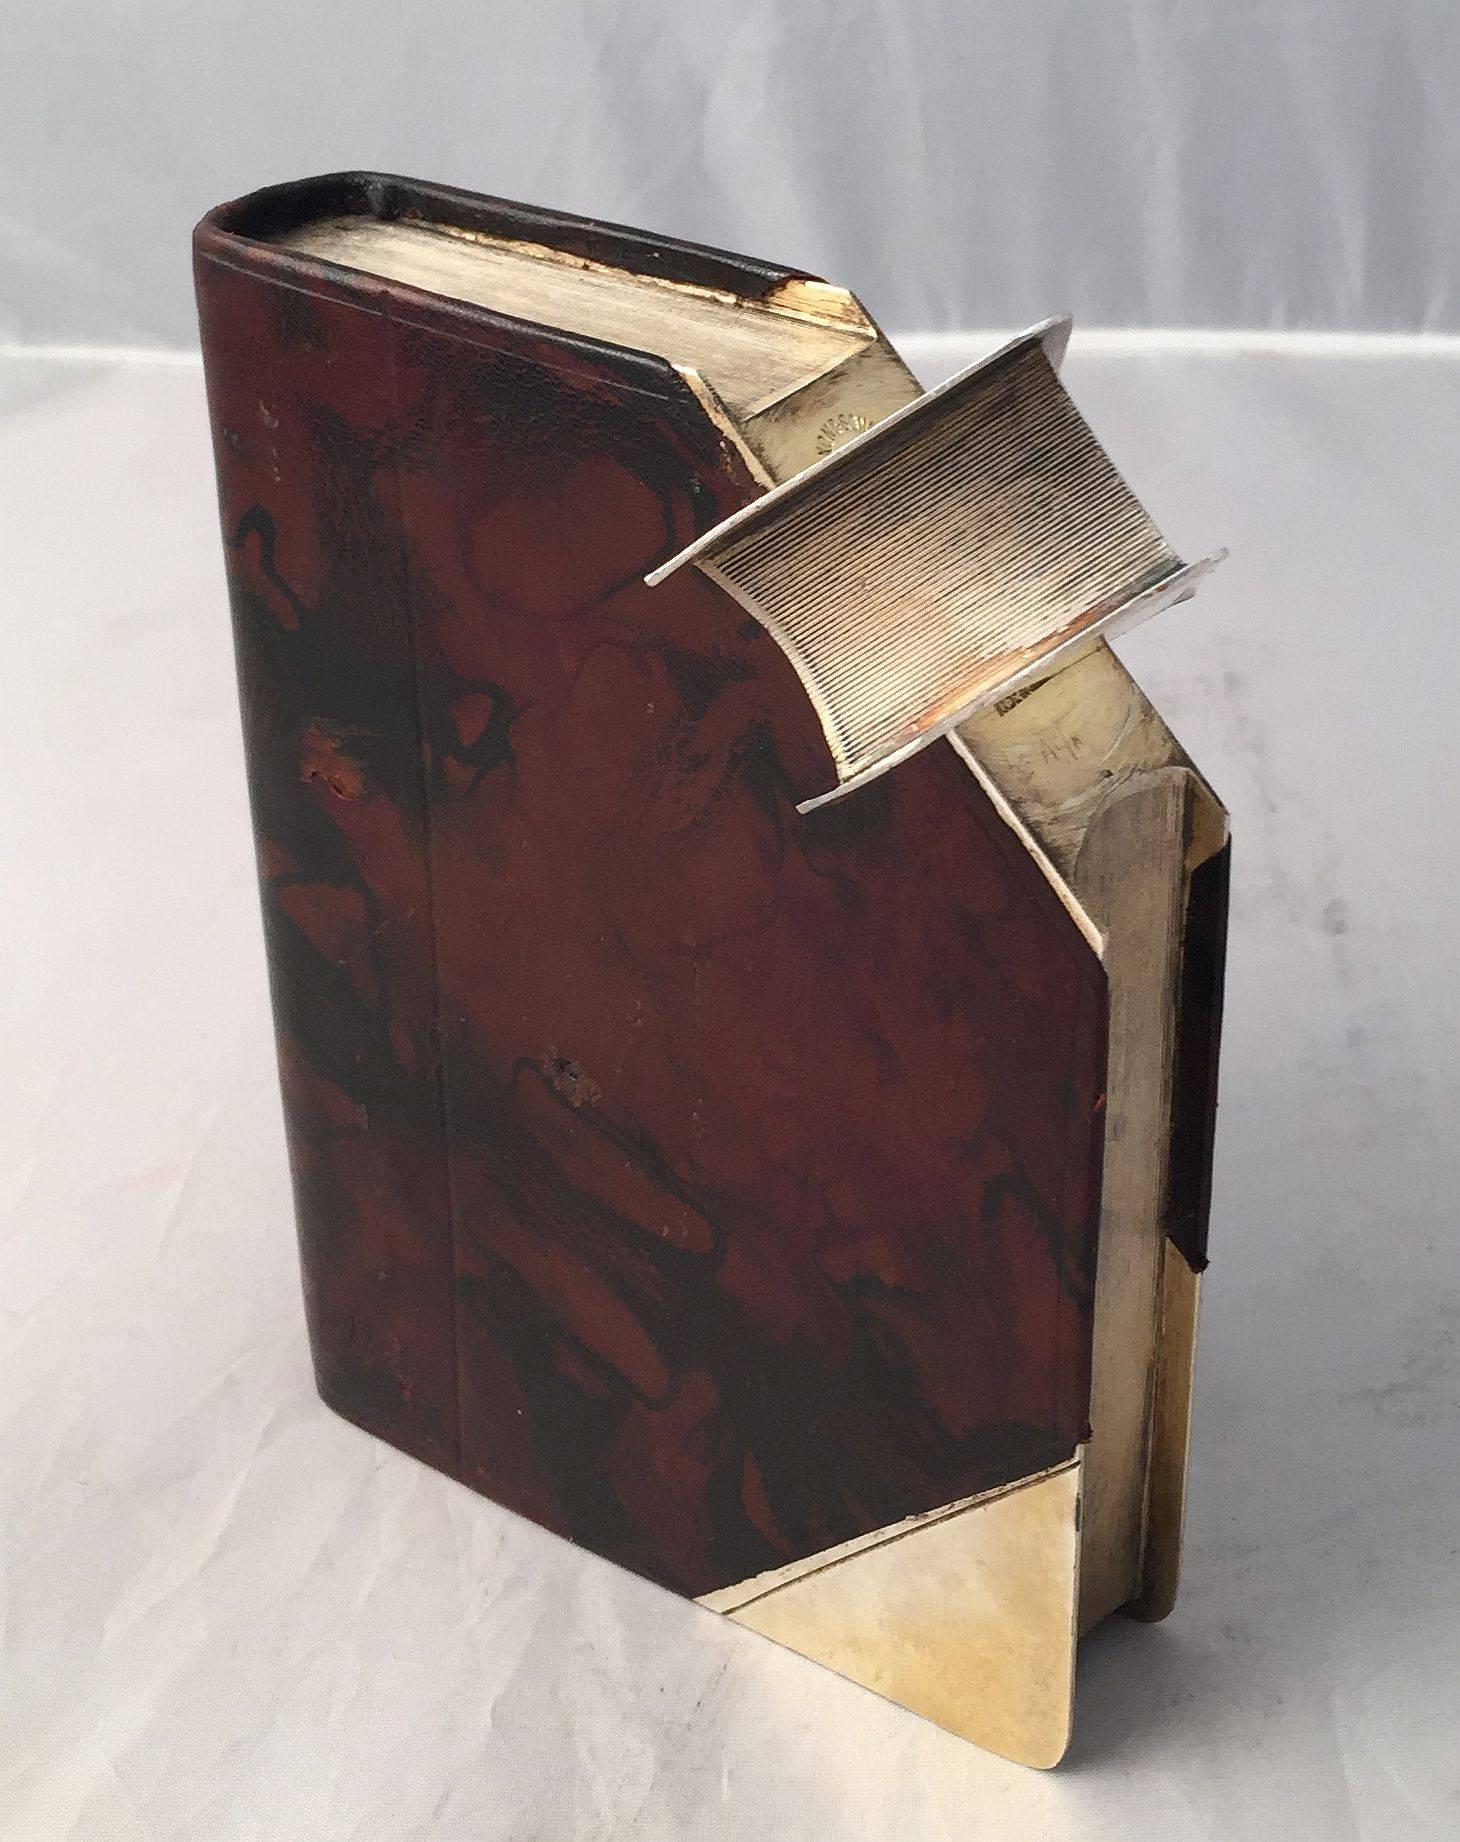 book shaped flask